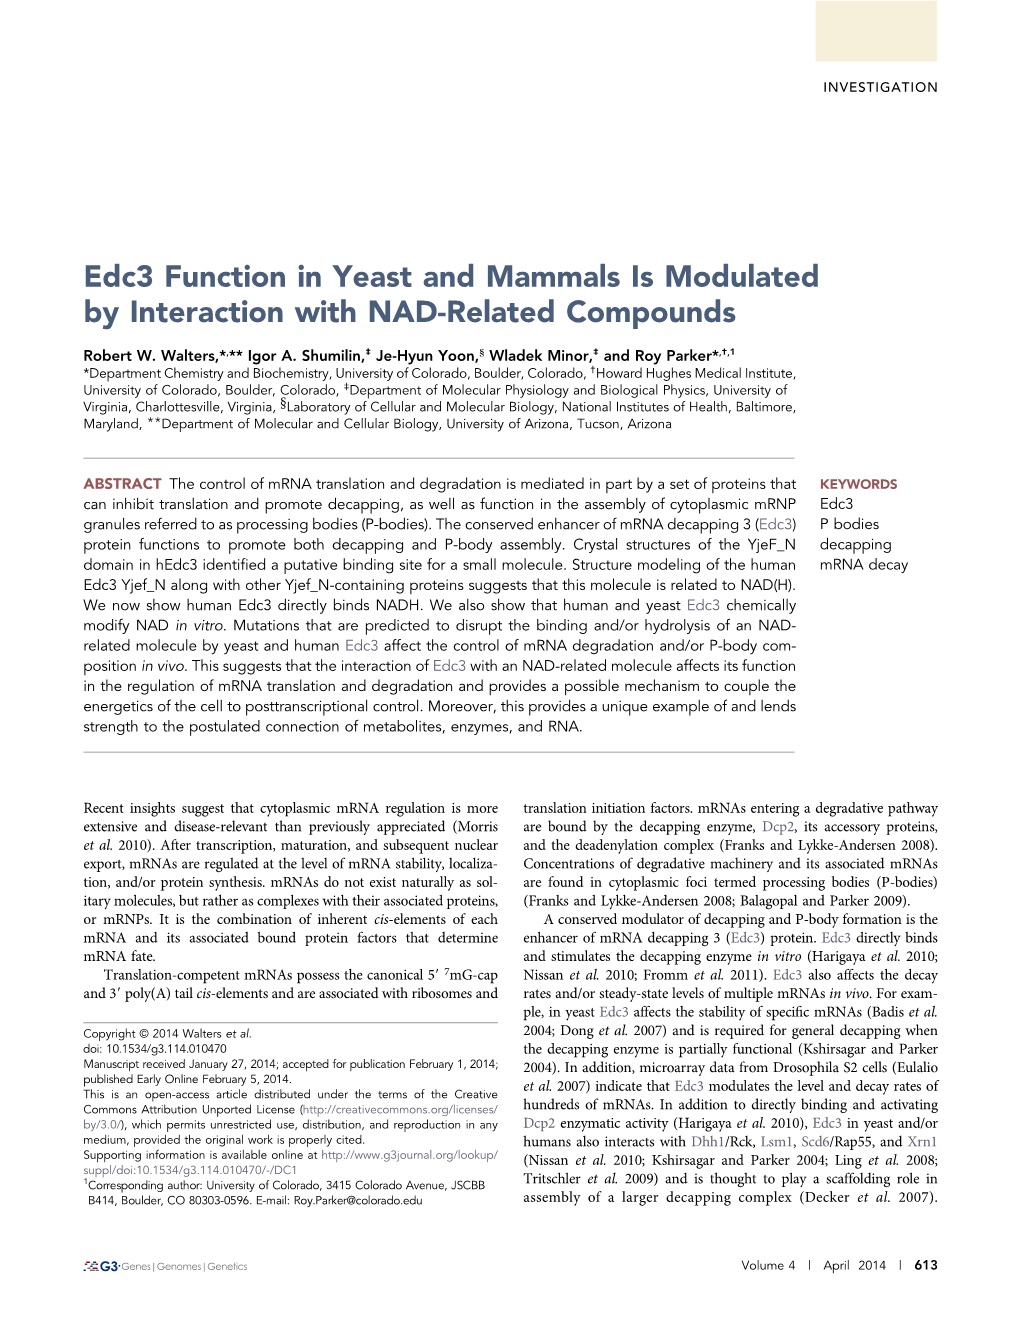 Edc3 Function in Yeast and Mammals Is Modulated by Interaction with NAD-Related Compounds